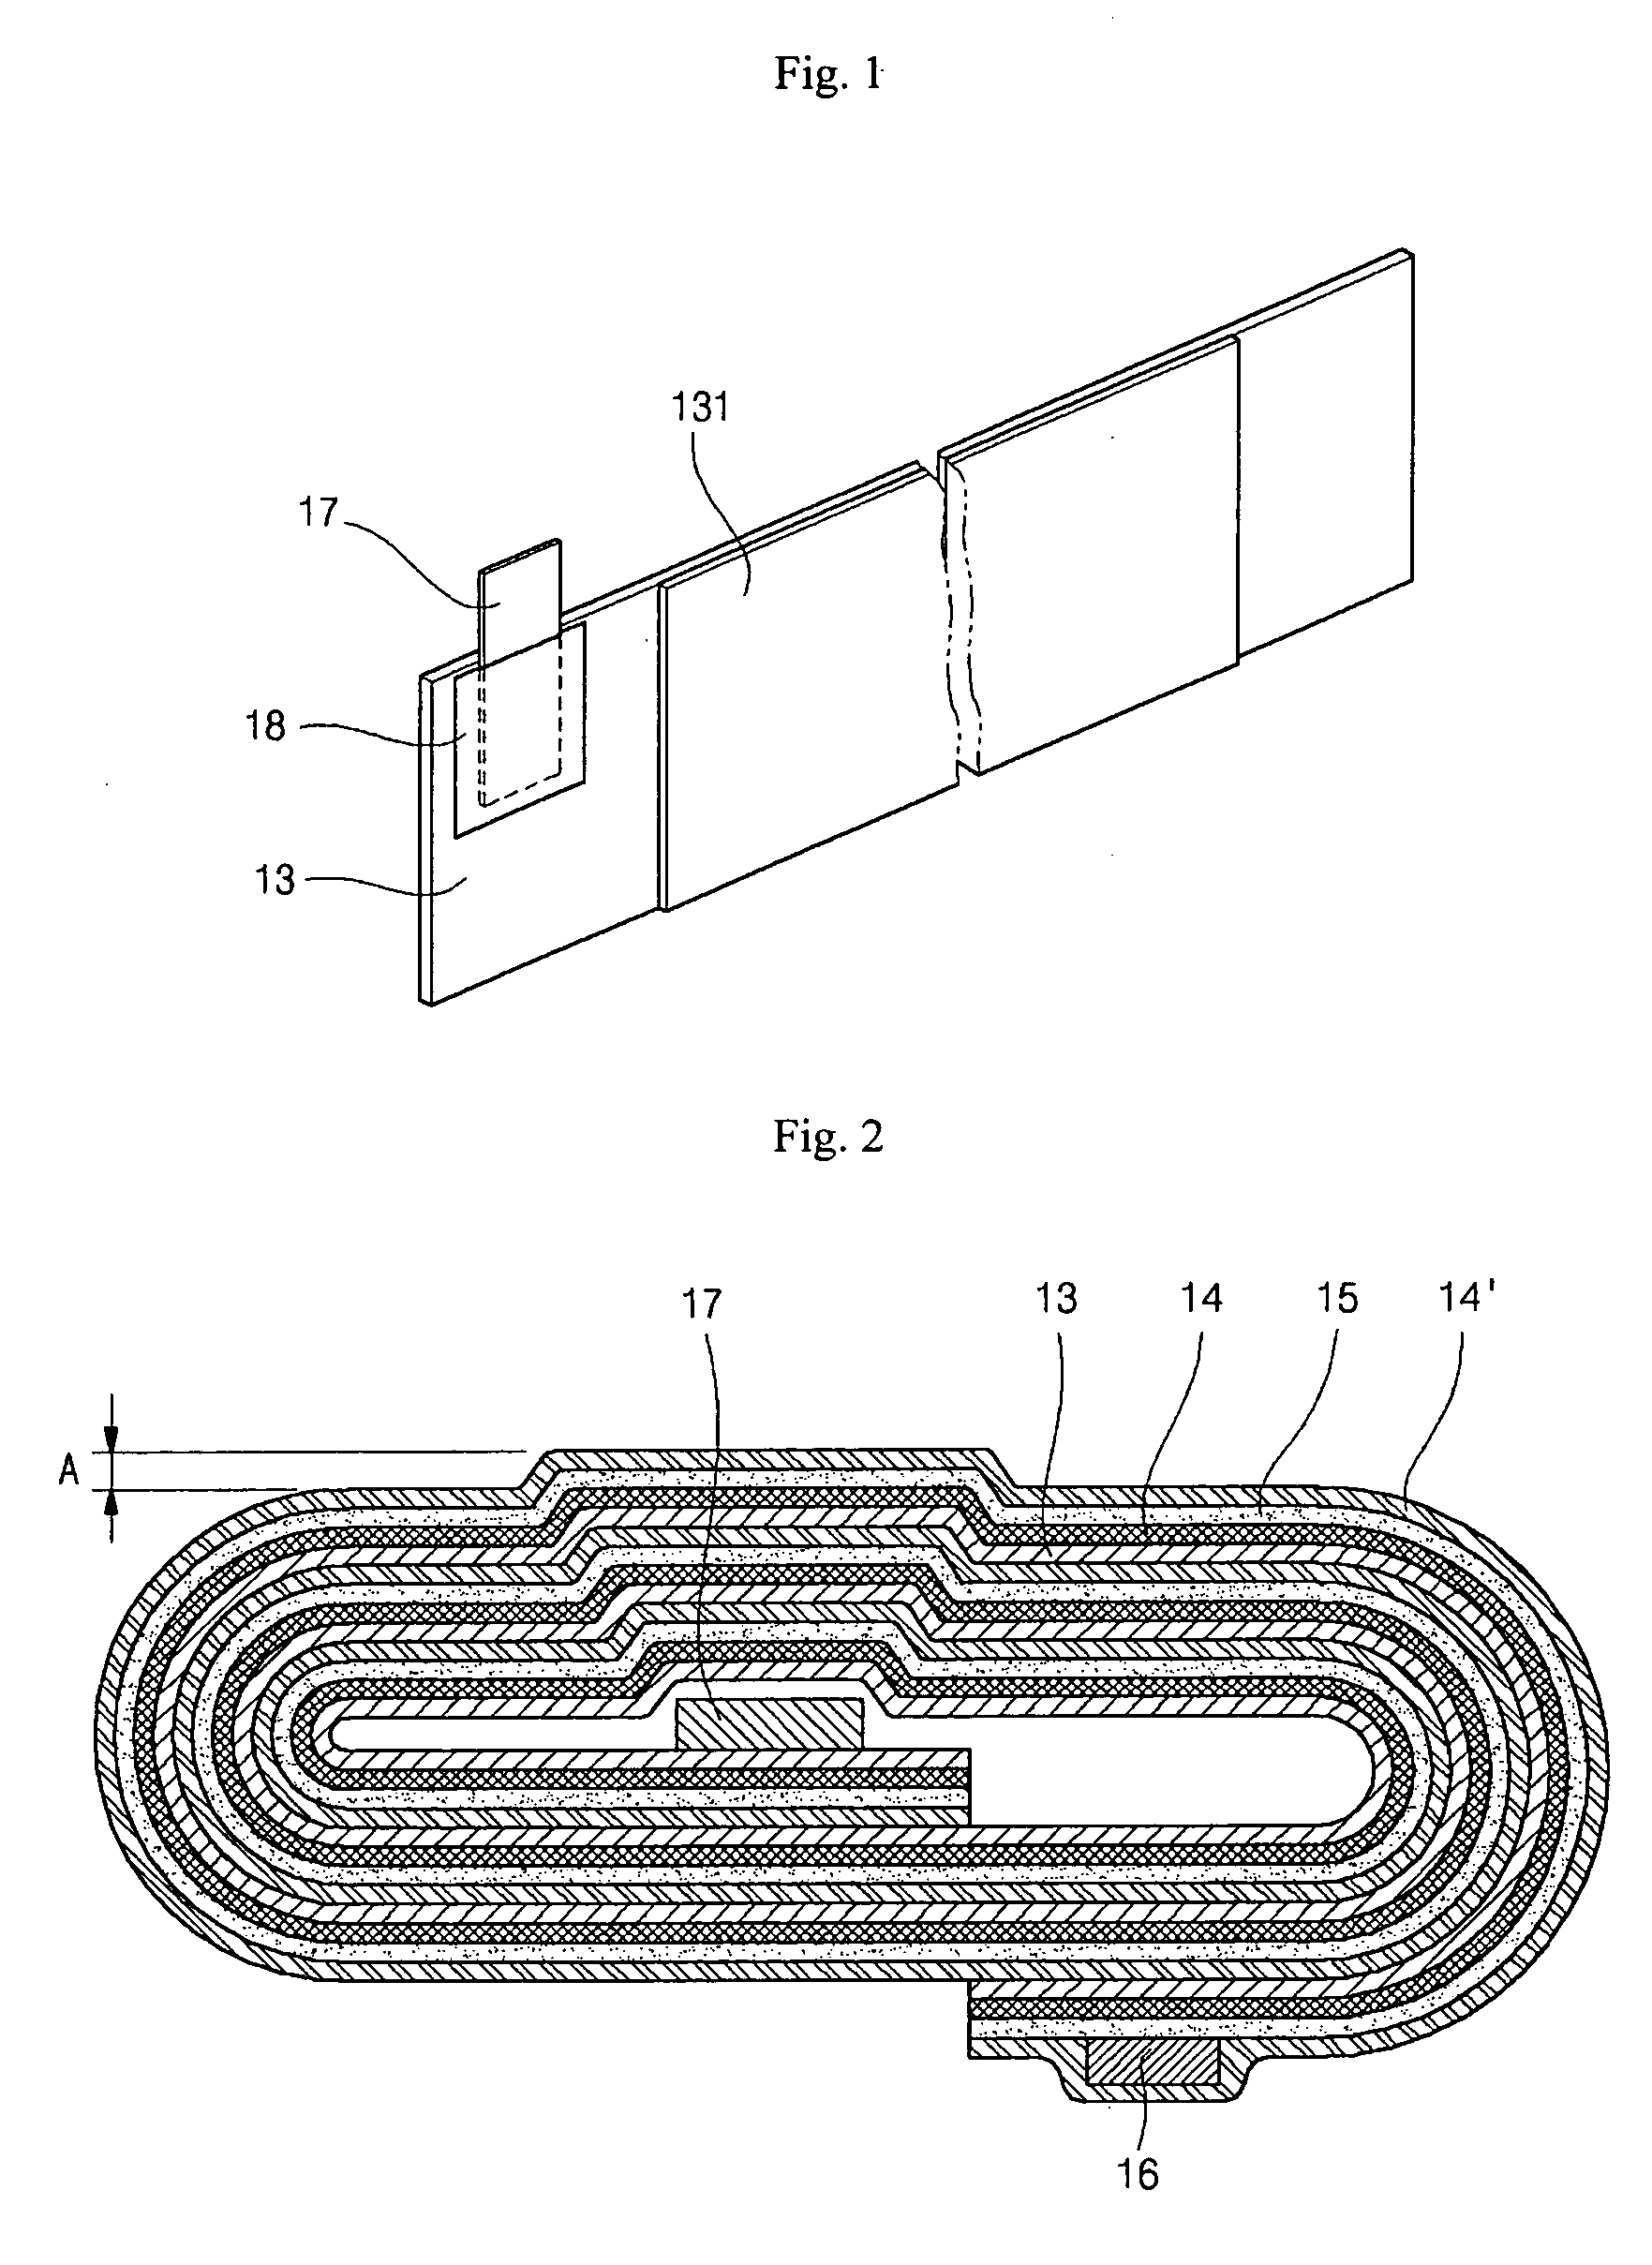 Rechargeable battery with jelly roll type electrode assembly